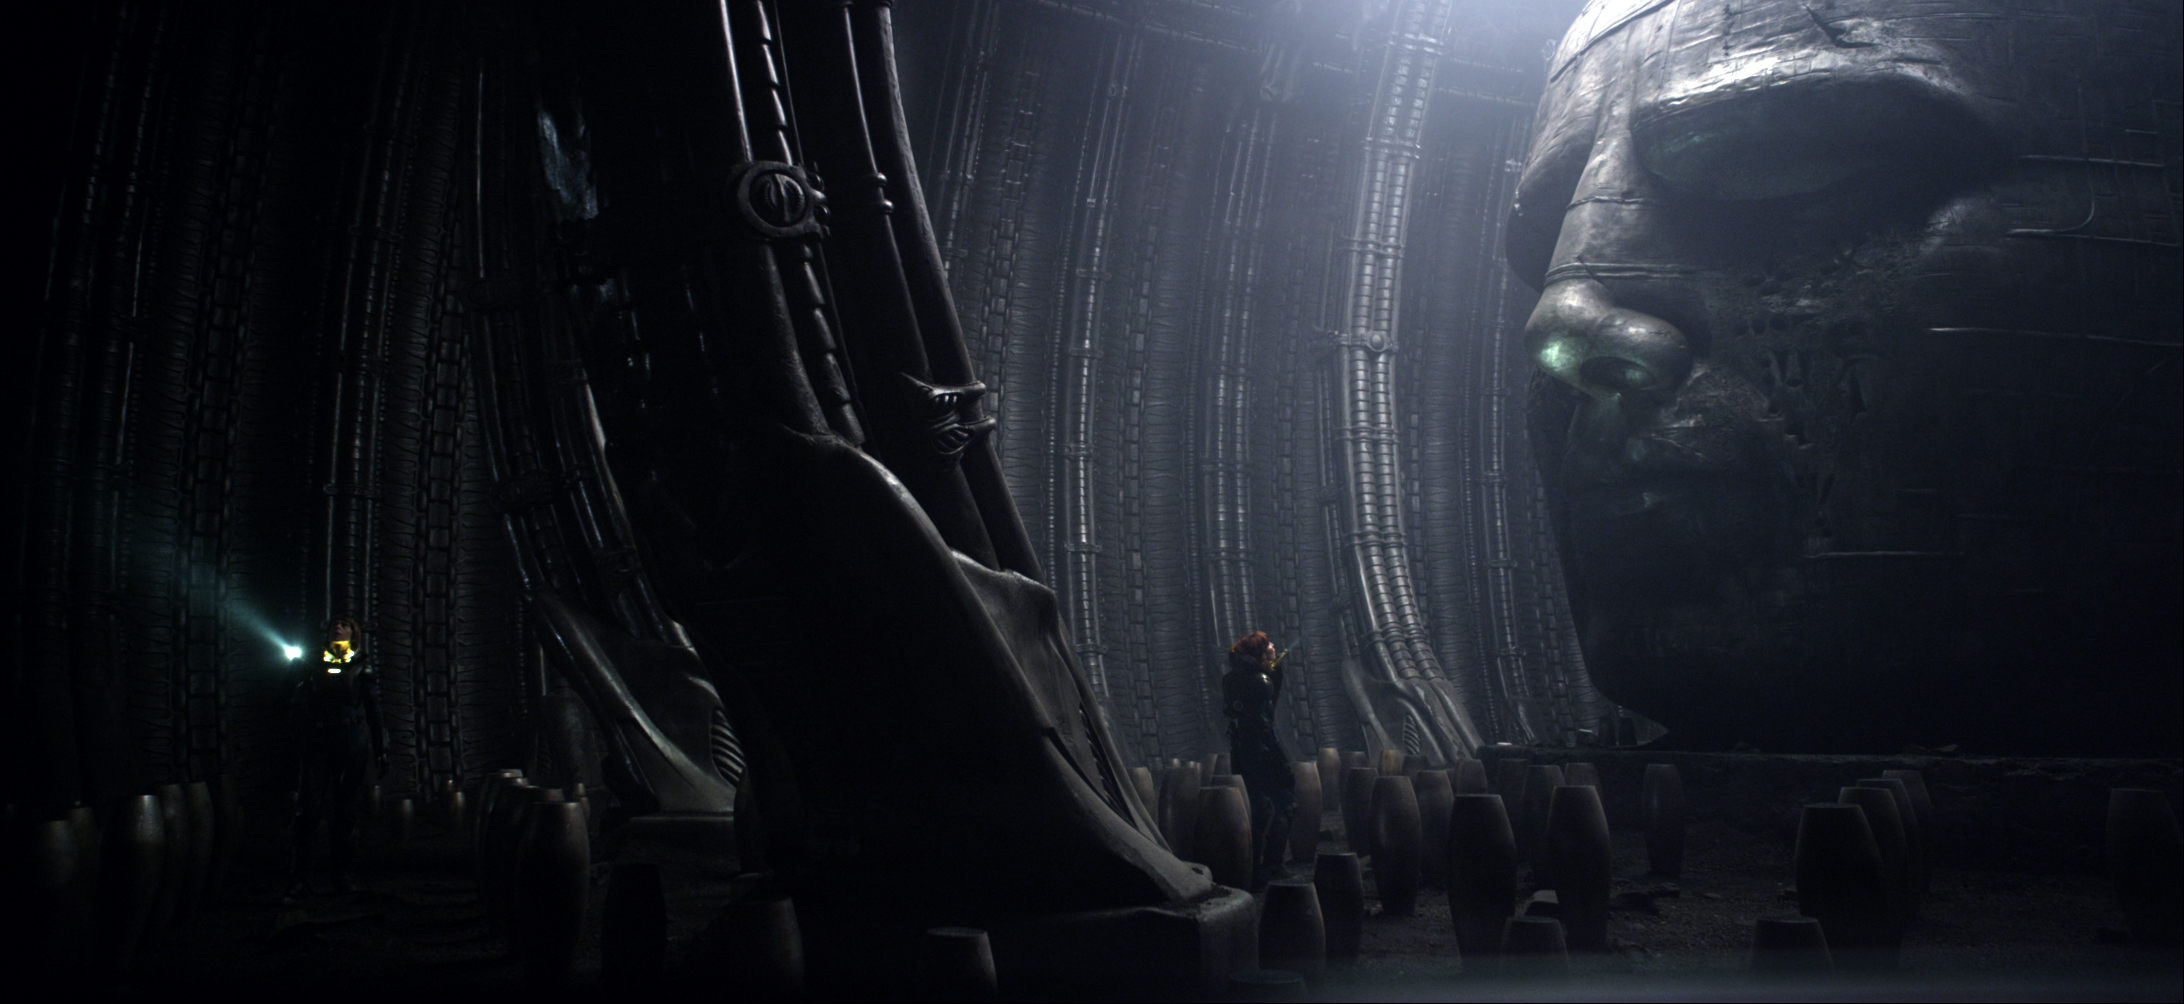 ‘Discover Prometheus’ with new images from the film